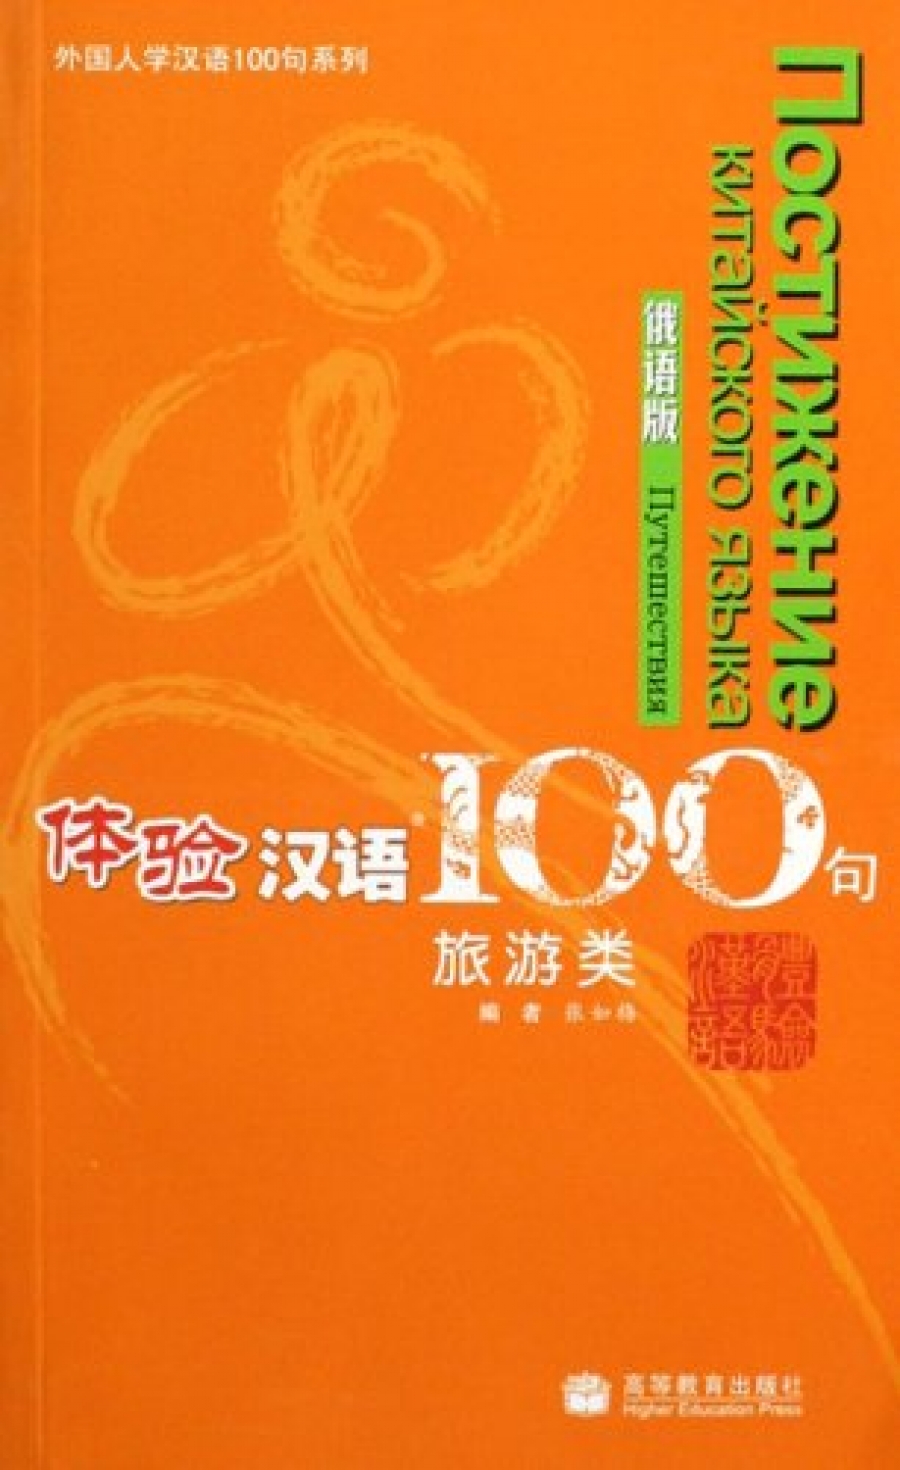 Experiencing Chinese 100: Traveling in China. Russian Version 